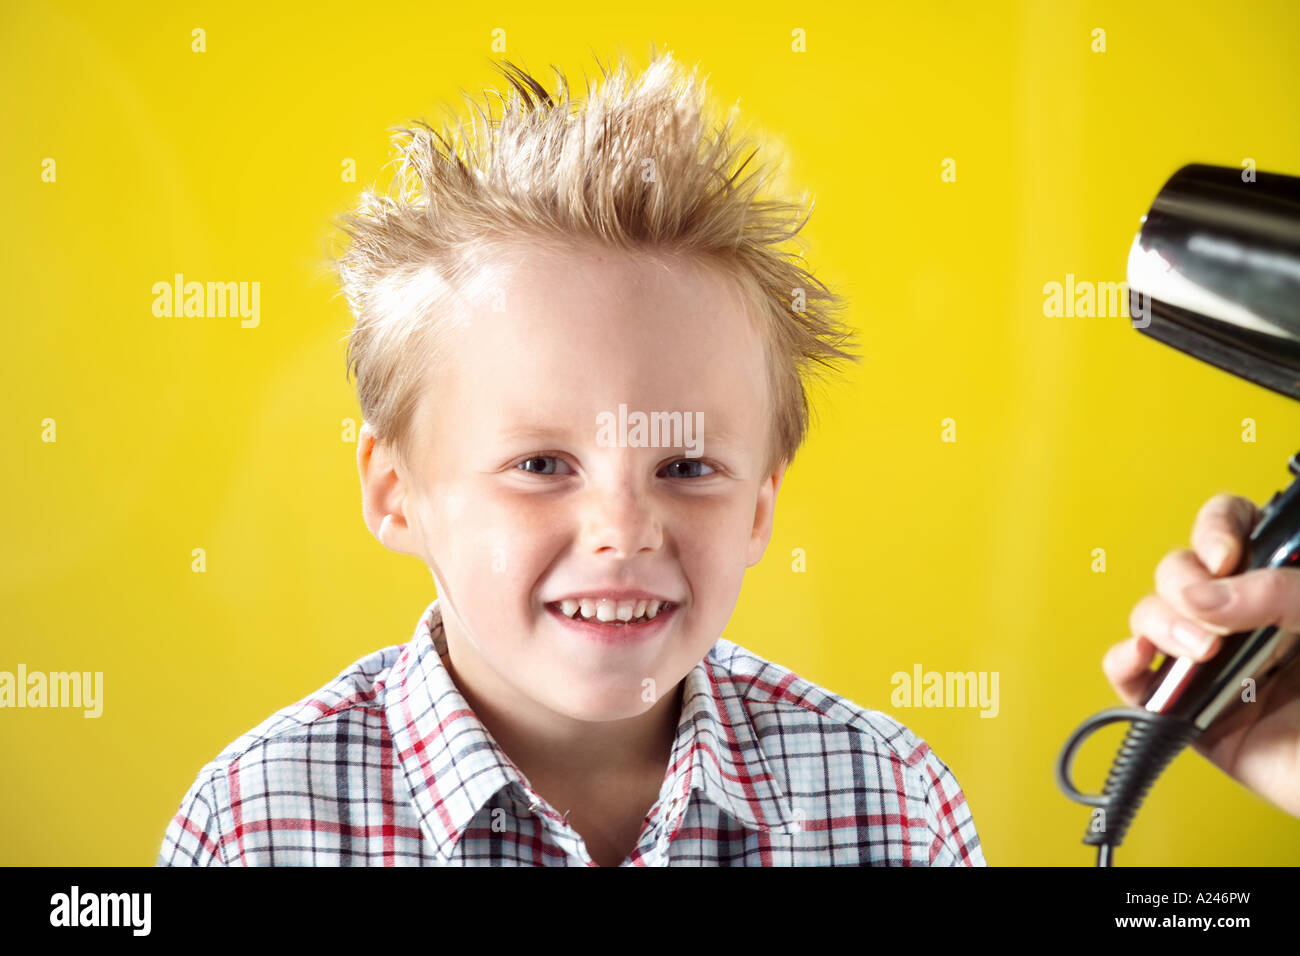 4. "Blonde Haircuts for Boys: How to Choose the Right Style for Your Child" - wide 9